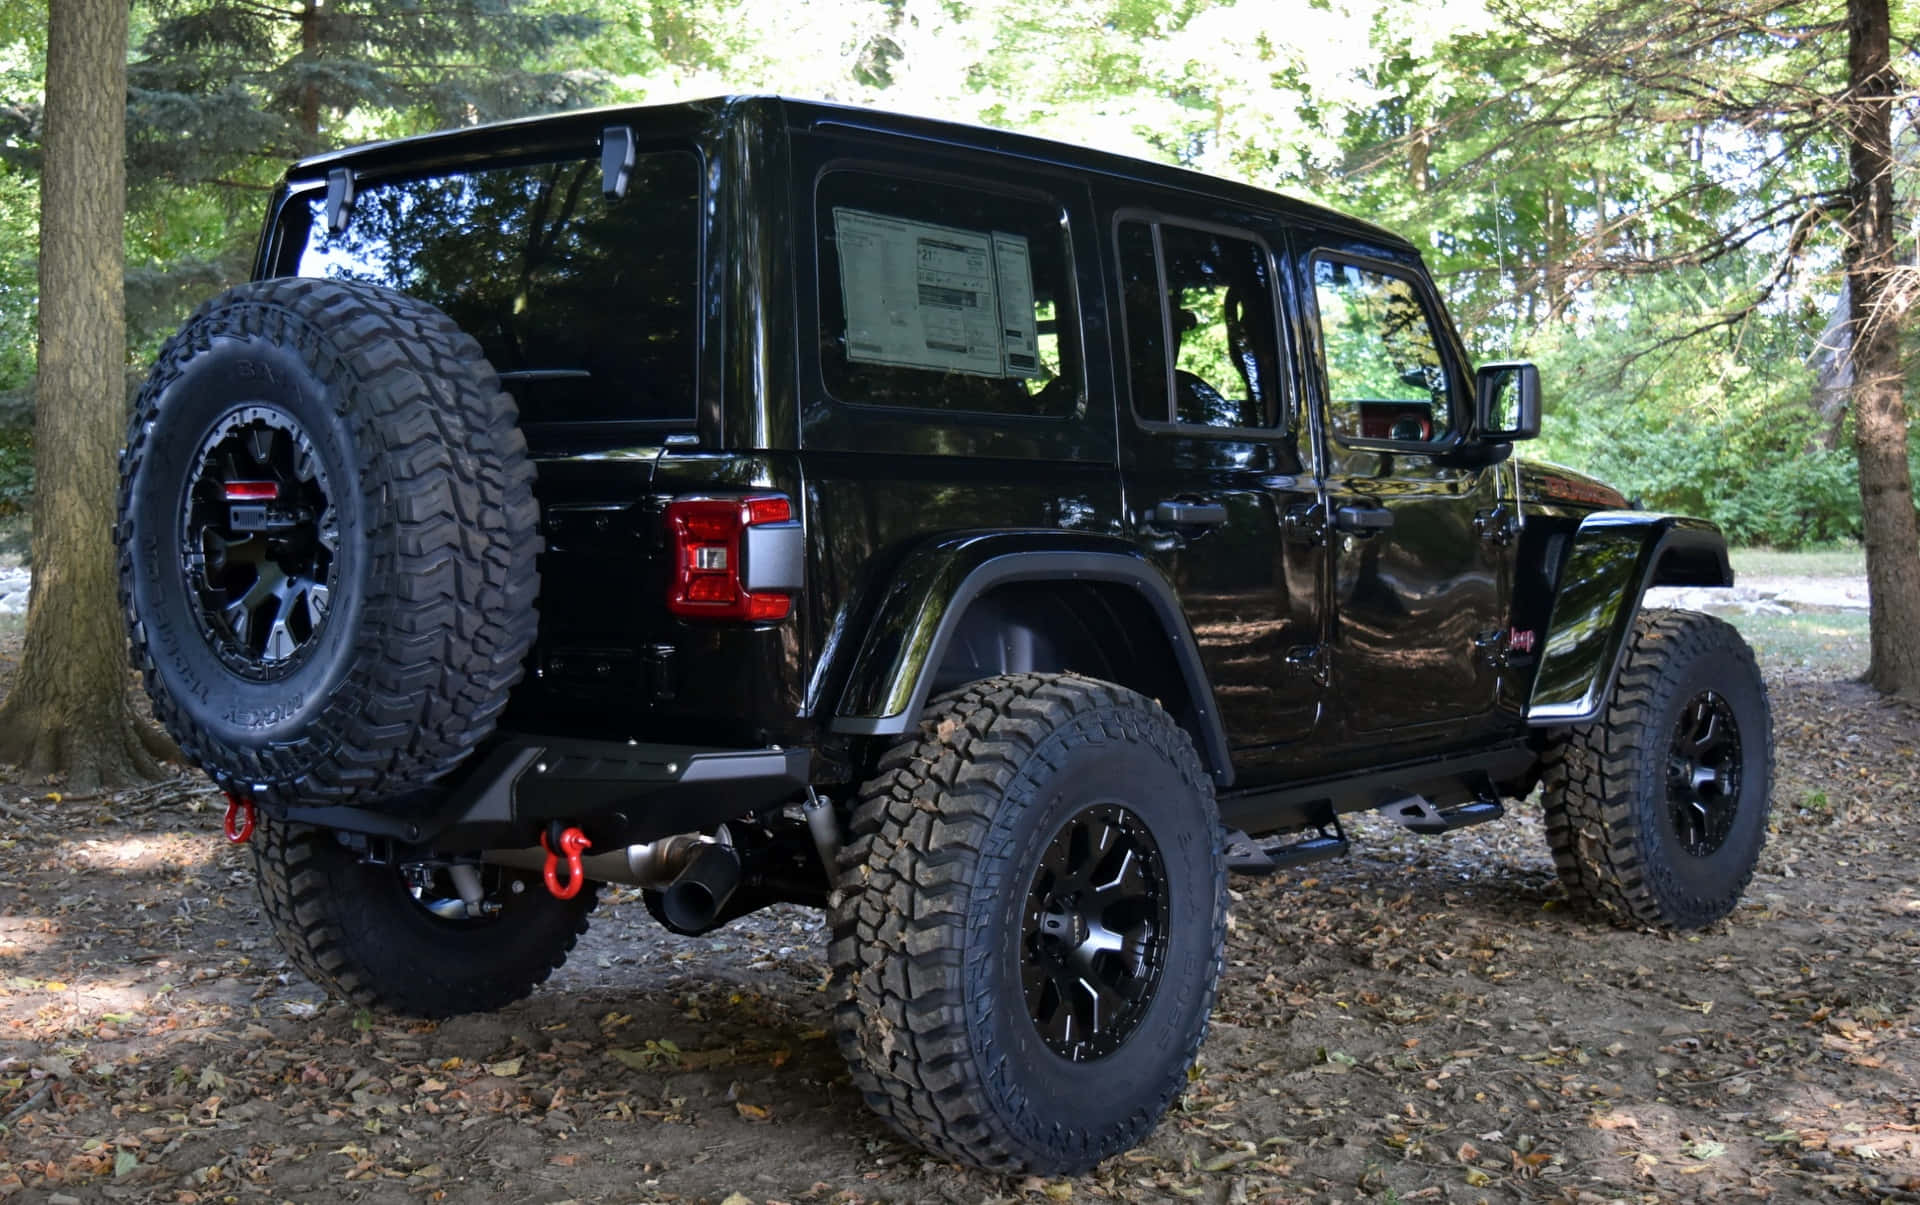 Make a statement in your Jeep Wrangler